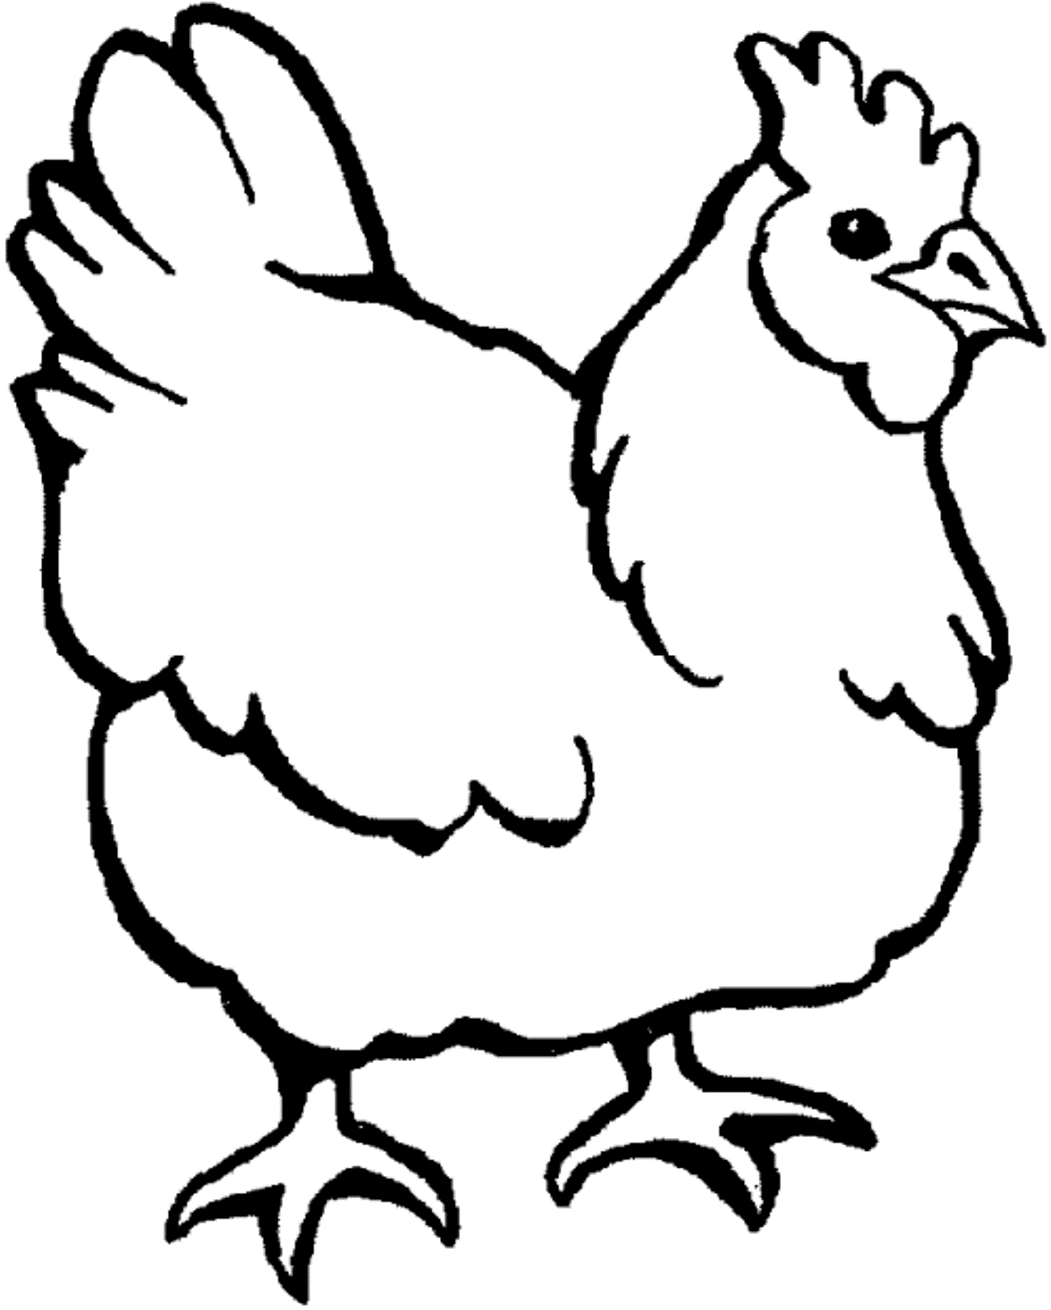 Hen black and white drawing clipart image